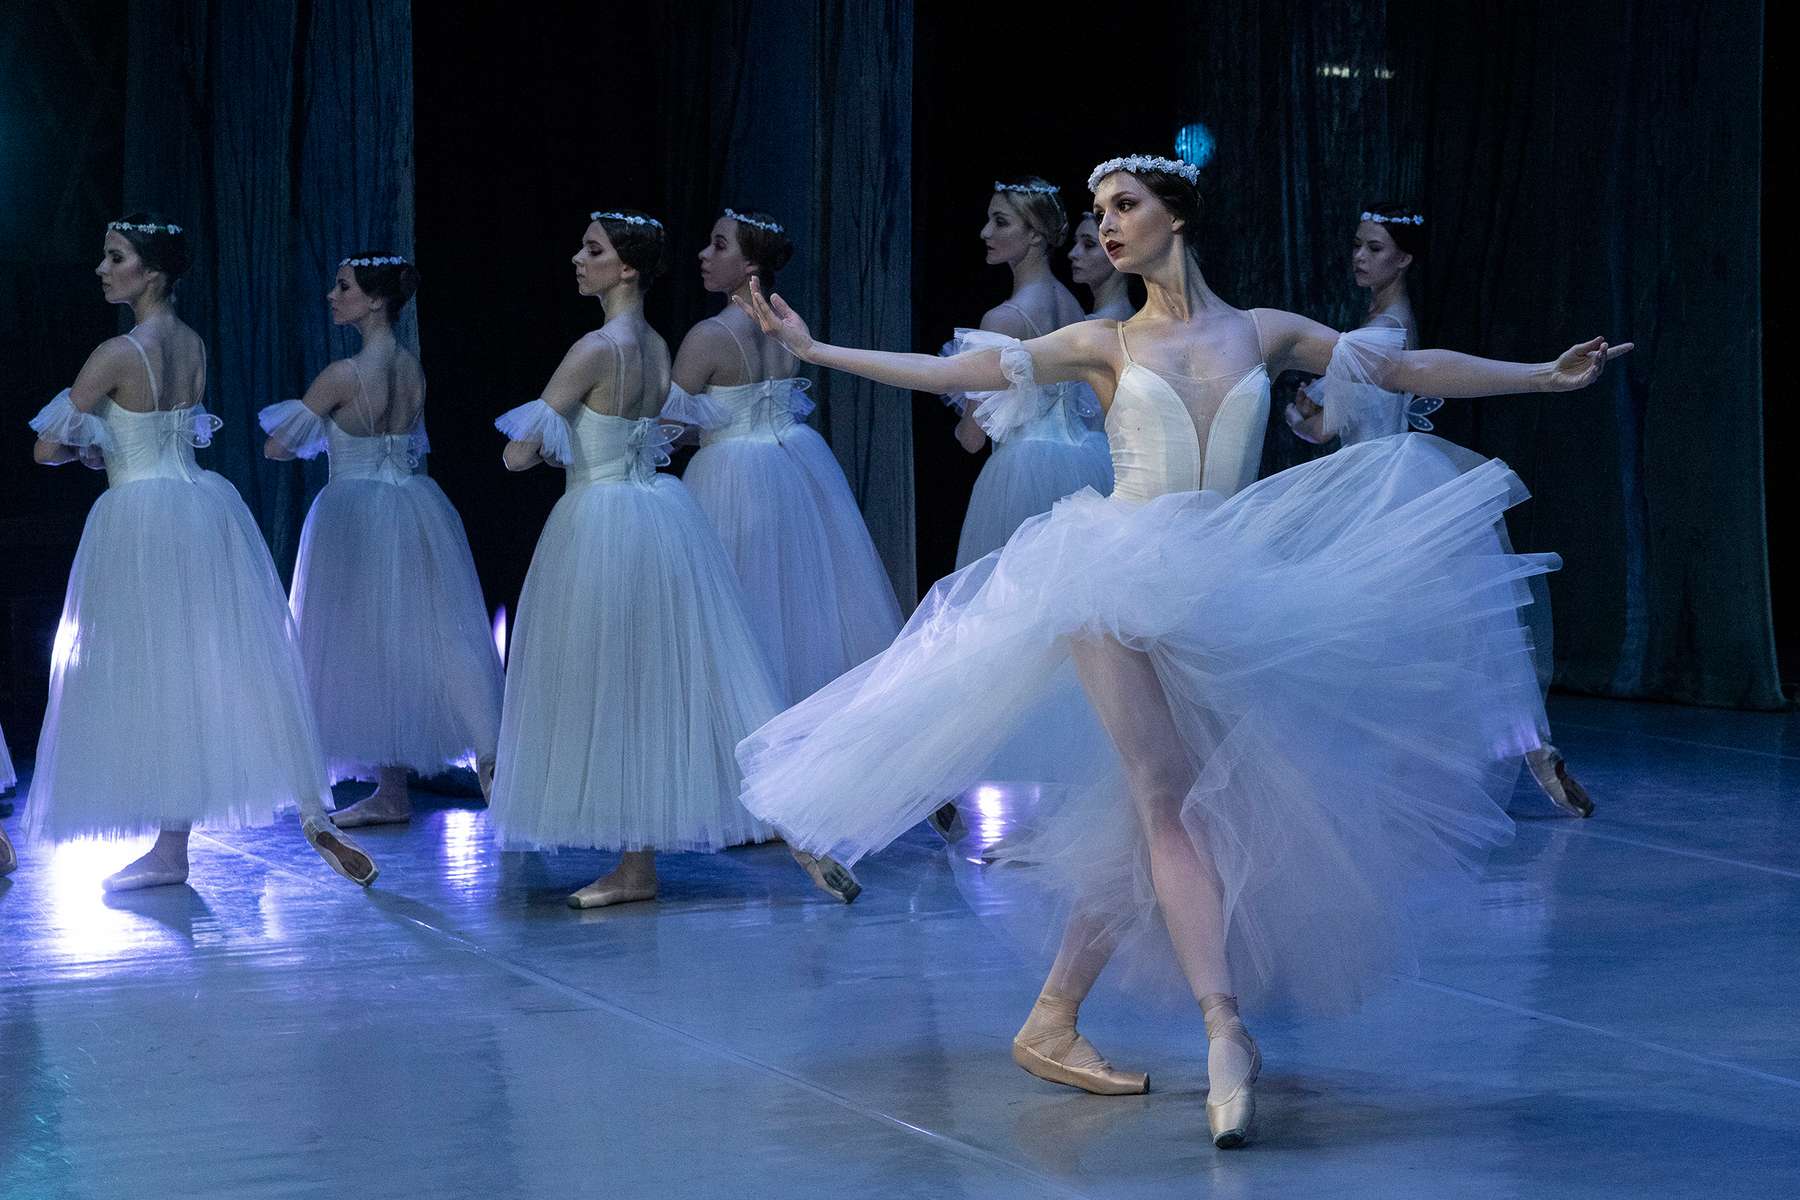 LVIV, UKRAINE - Ballet dancers are seen onstage during the performance of Giselle on June 10, 2022 in Lviv, Ukraine. The Lviv National Opera house started performances last month for both ballet and opera.The bomb shelter can only hold 300 people so tickets are limited incase a siren goes off during the performance. (Photo by Paula Bronstein /Getty Images)